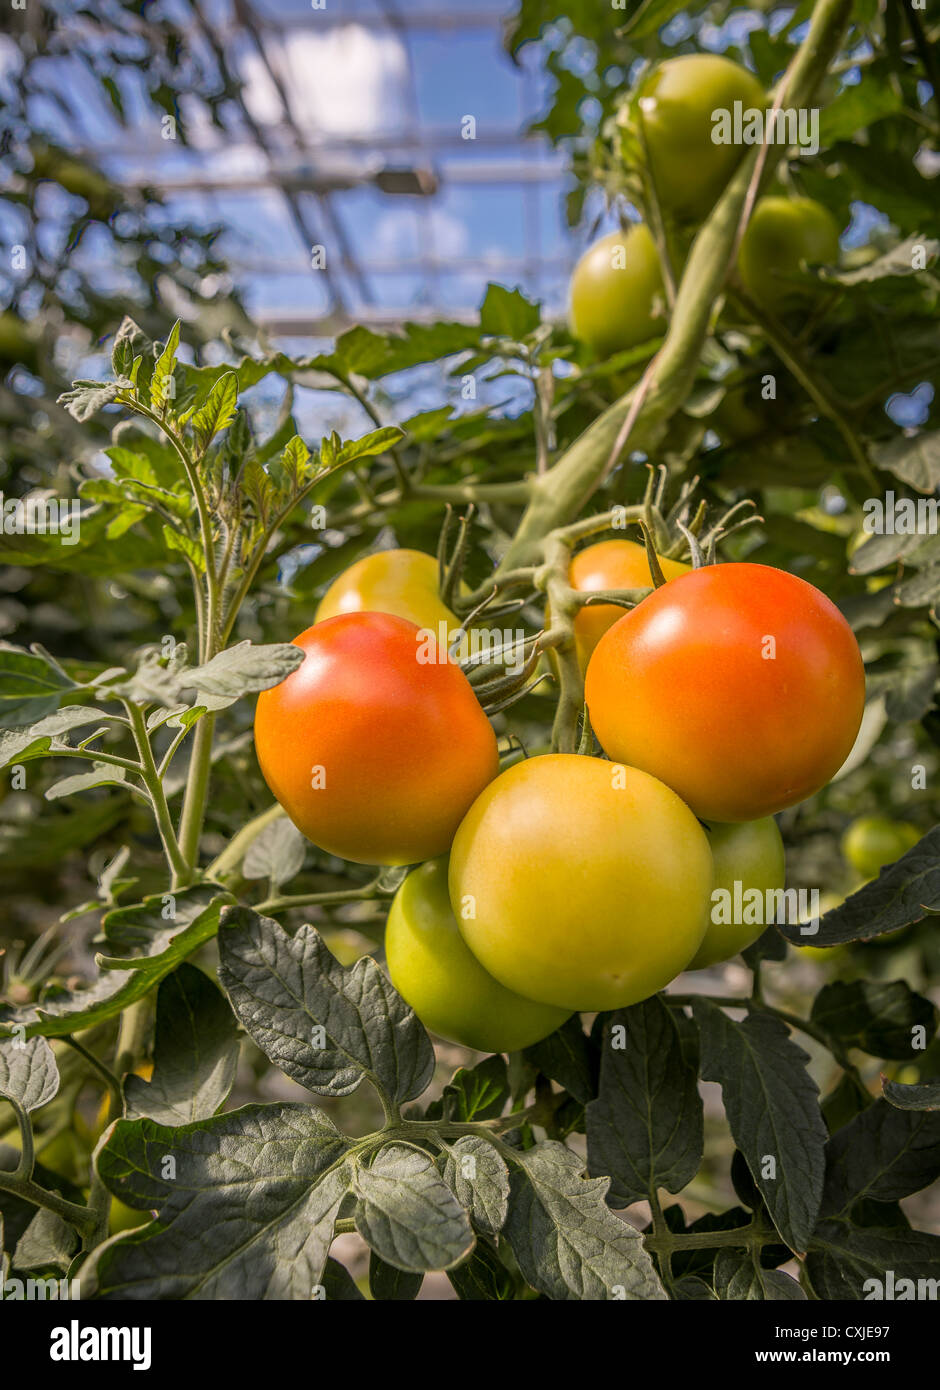 Tomatoes in greenhouse, Iceland Greenhouses are heated with geothermal energy keeping the cost of energy affordable and clean. Stock Photo